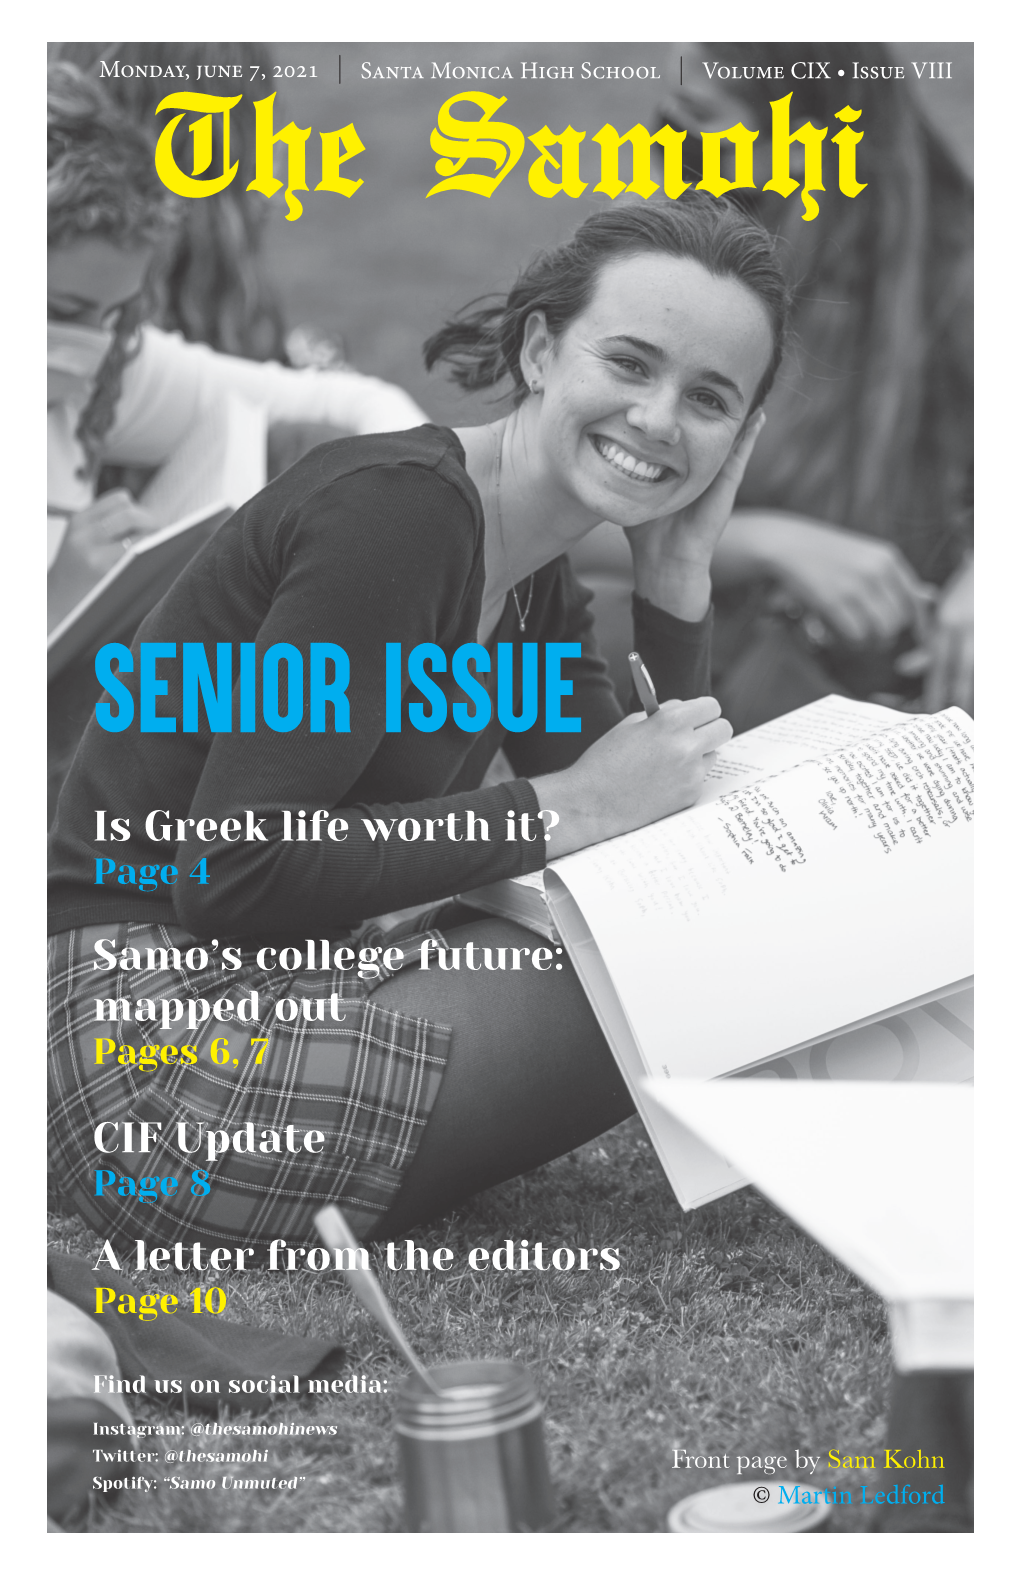 Is Greek Life Worth It? Samo's College Future: Mapped out CIF Update a Letter from the Editors